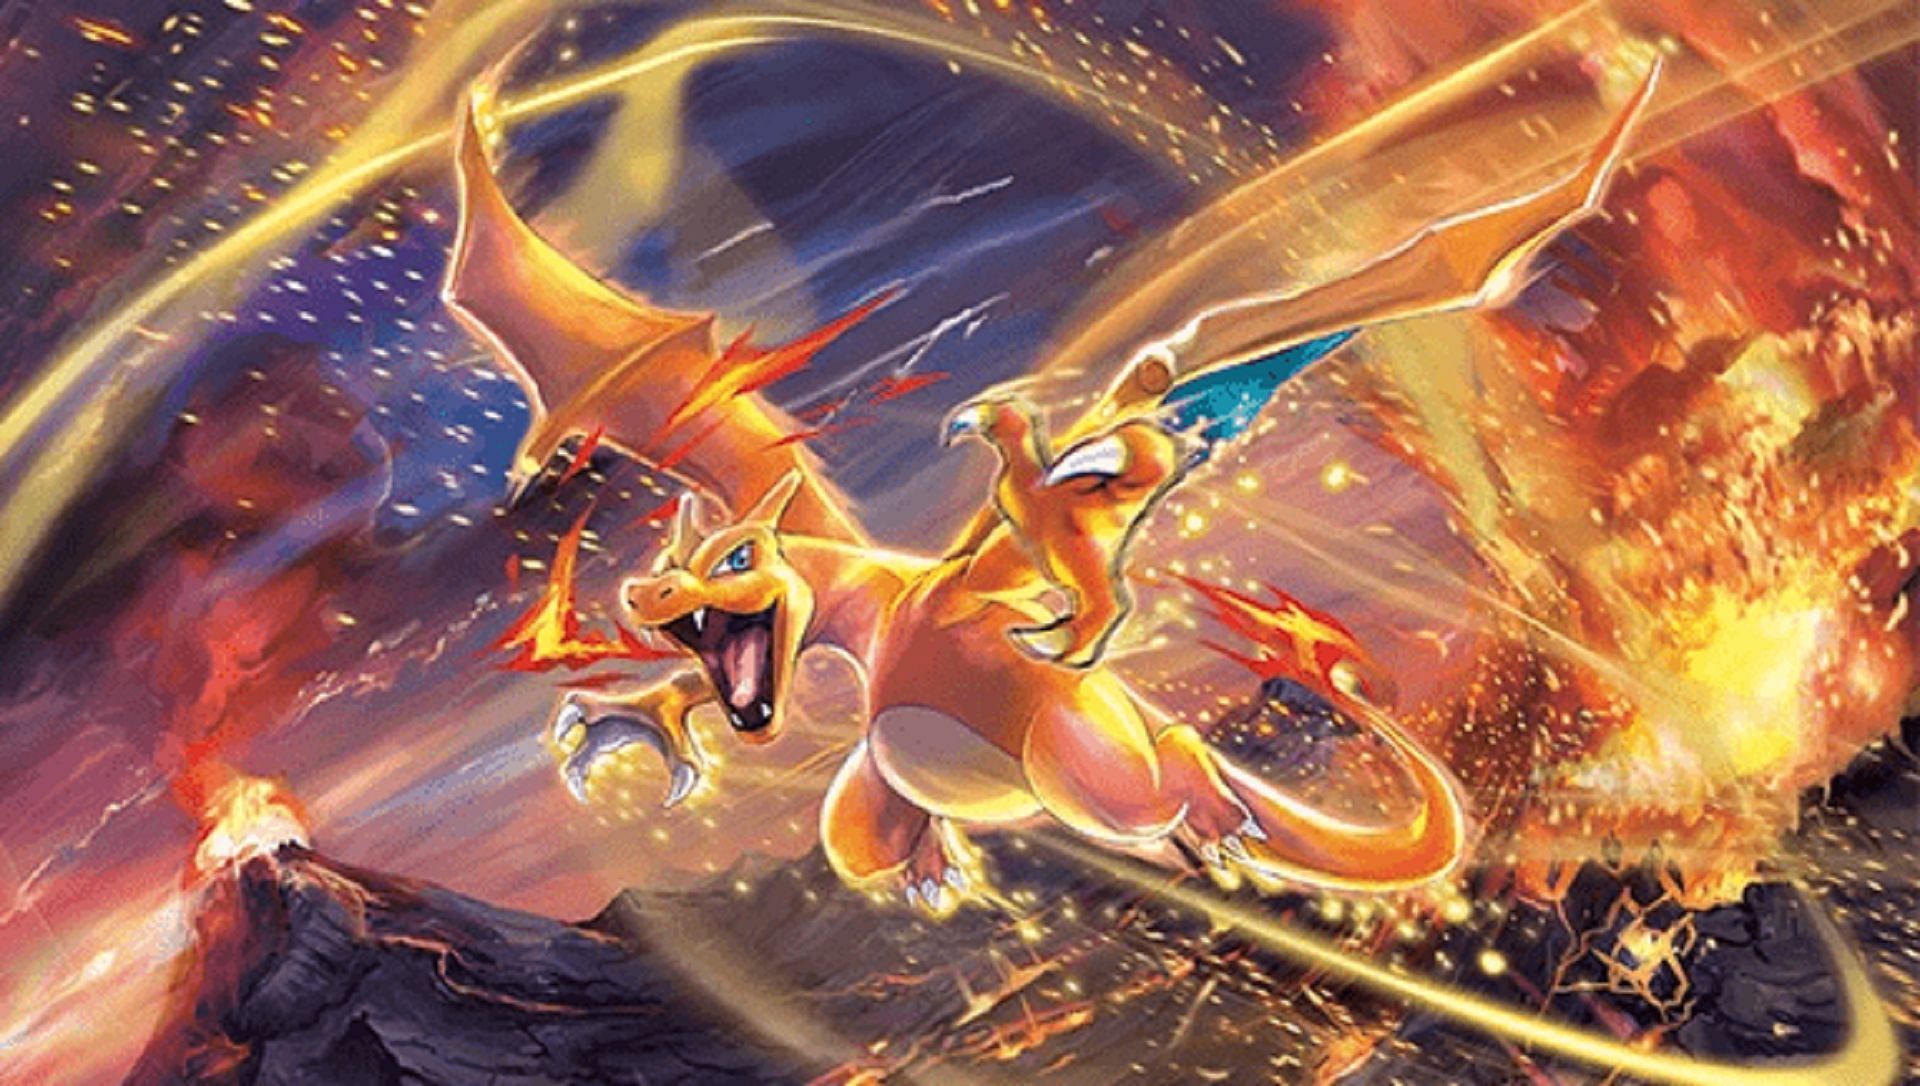 Charizard will likely indefinitely remain one of the most popular Pokemon of all time (Image via The Pokemon Company)